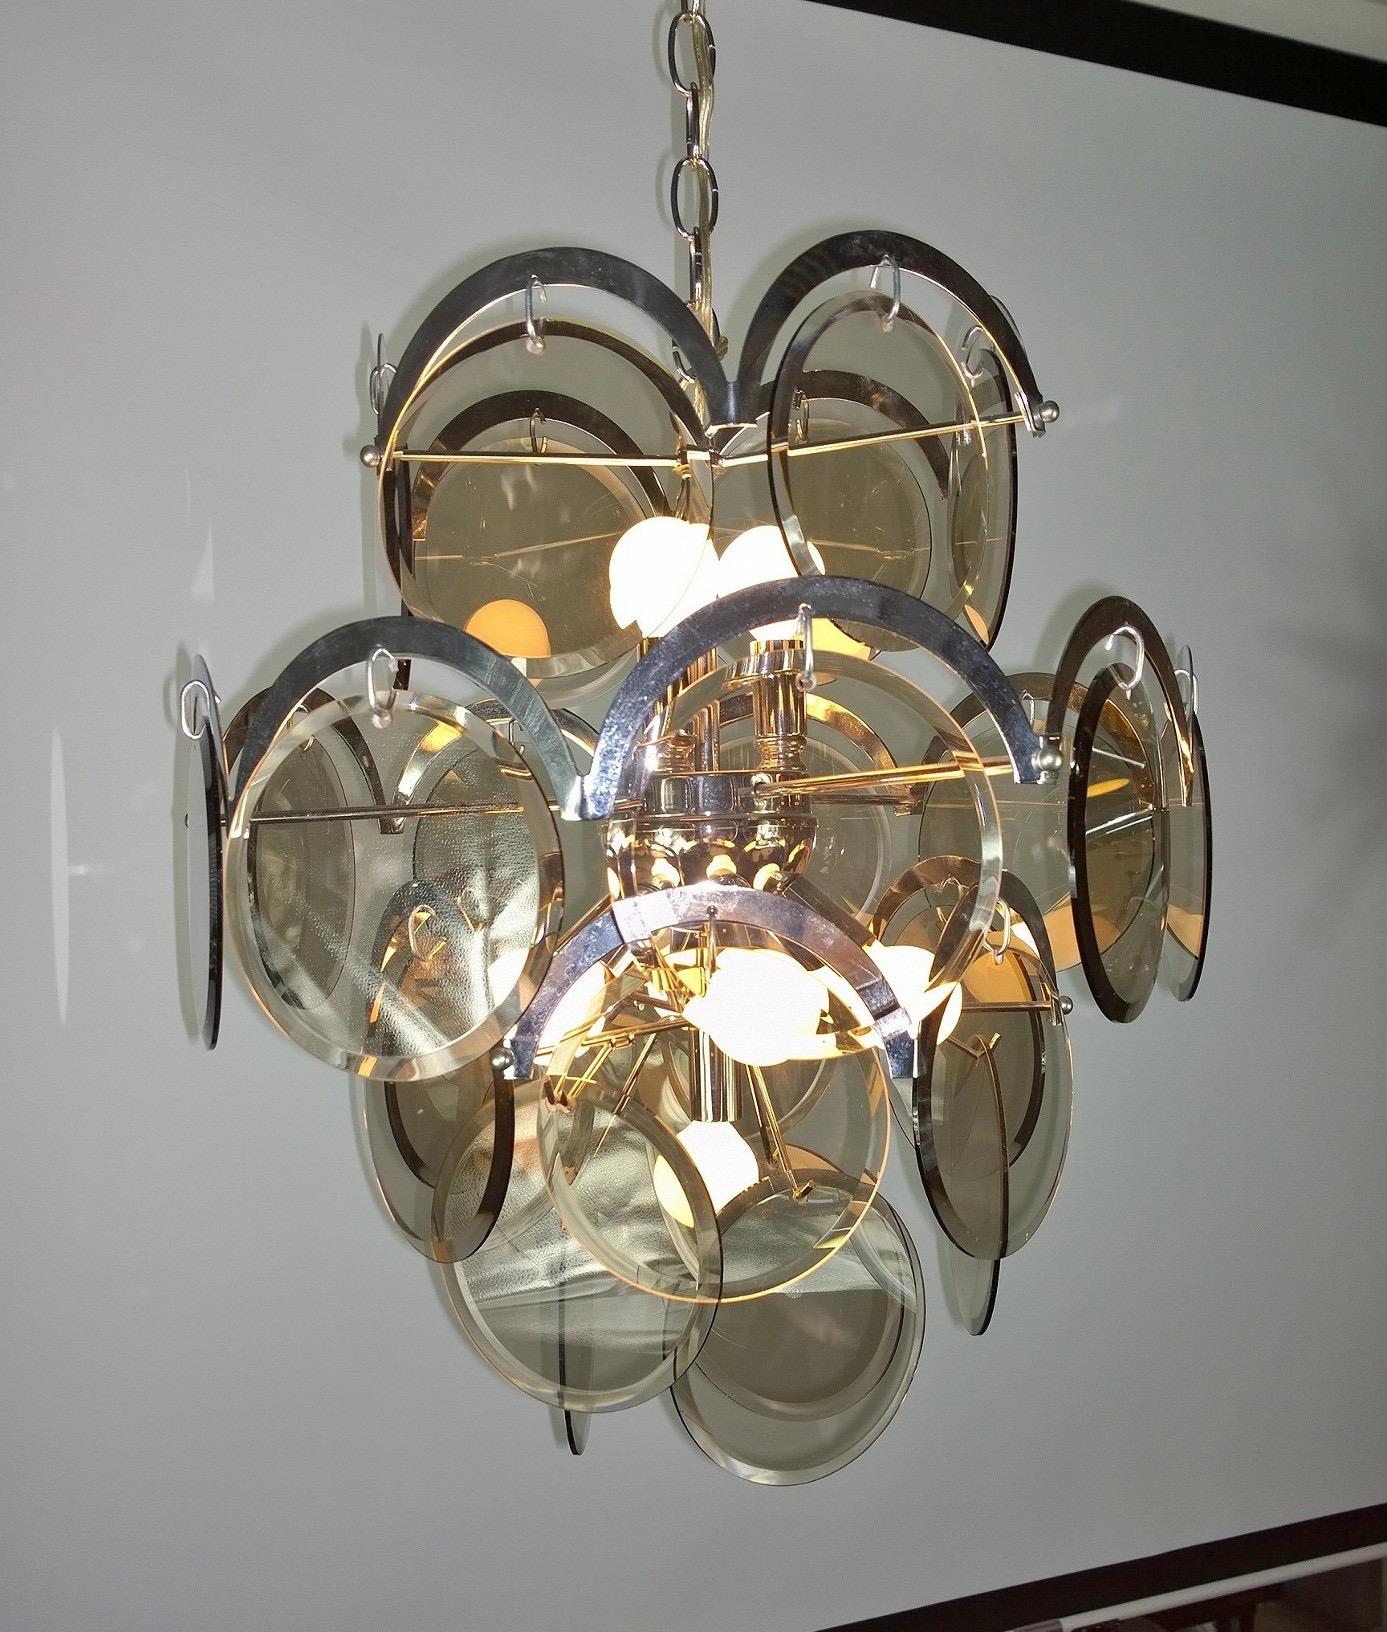 Offered is a Mid-Century Modern Italian Vistosi attributed ten torchère chandelier with four graduated tiers of beveled smoked glass discs framed by half-moon shaped plated chrome and chrome frame. Both elegant and modern, this piece is highly